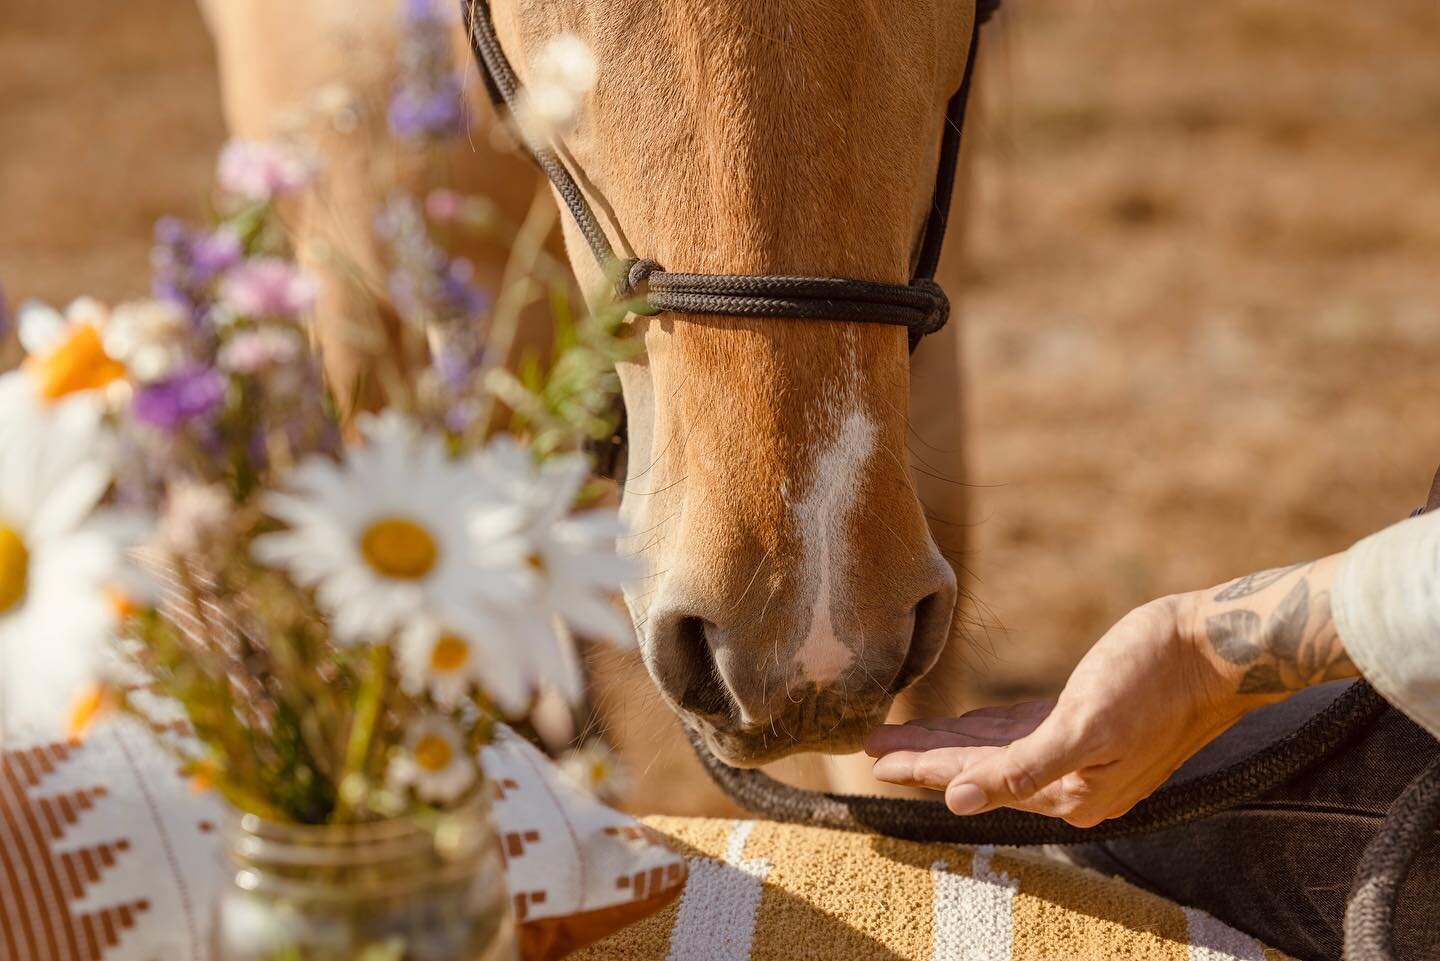 Herbs are the common thread in my bodywork and horsemanship practice 🌿🙌🏼🐴

They effectively nudge the body and mind to rest, digest, and mend. Some herbs are gentle. Others are potent. 

But no matter the reason we work with herbs, they bring us 